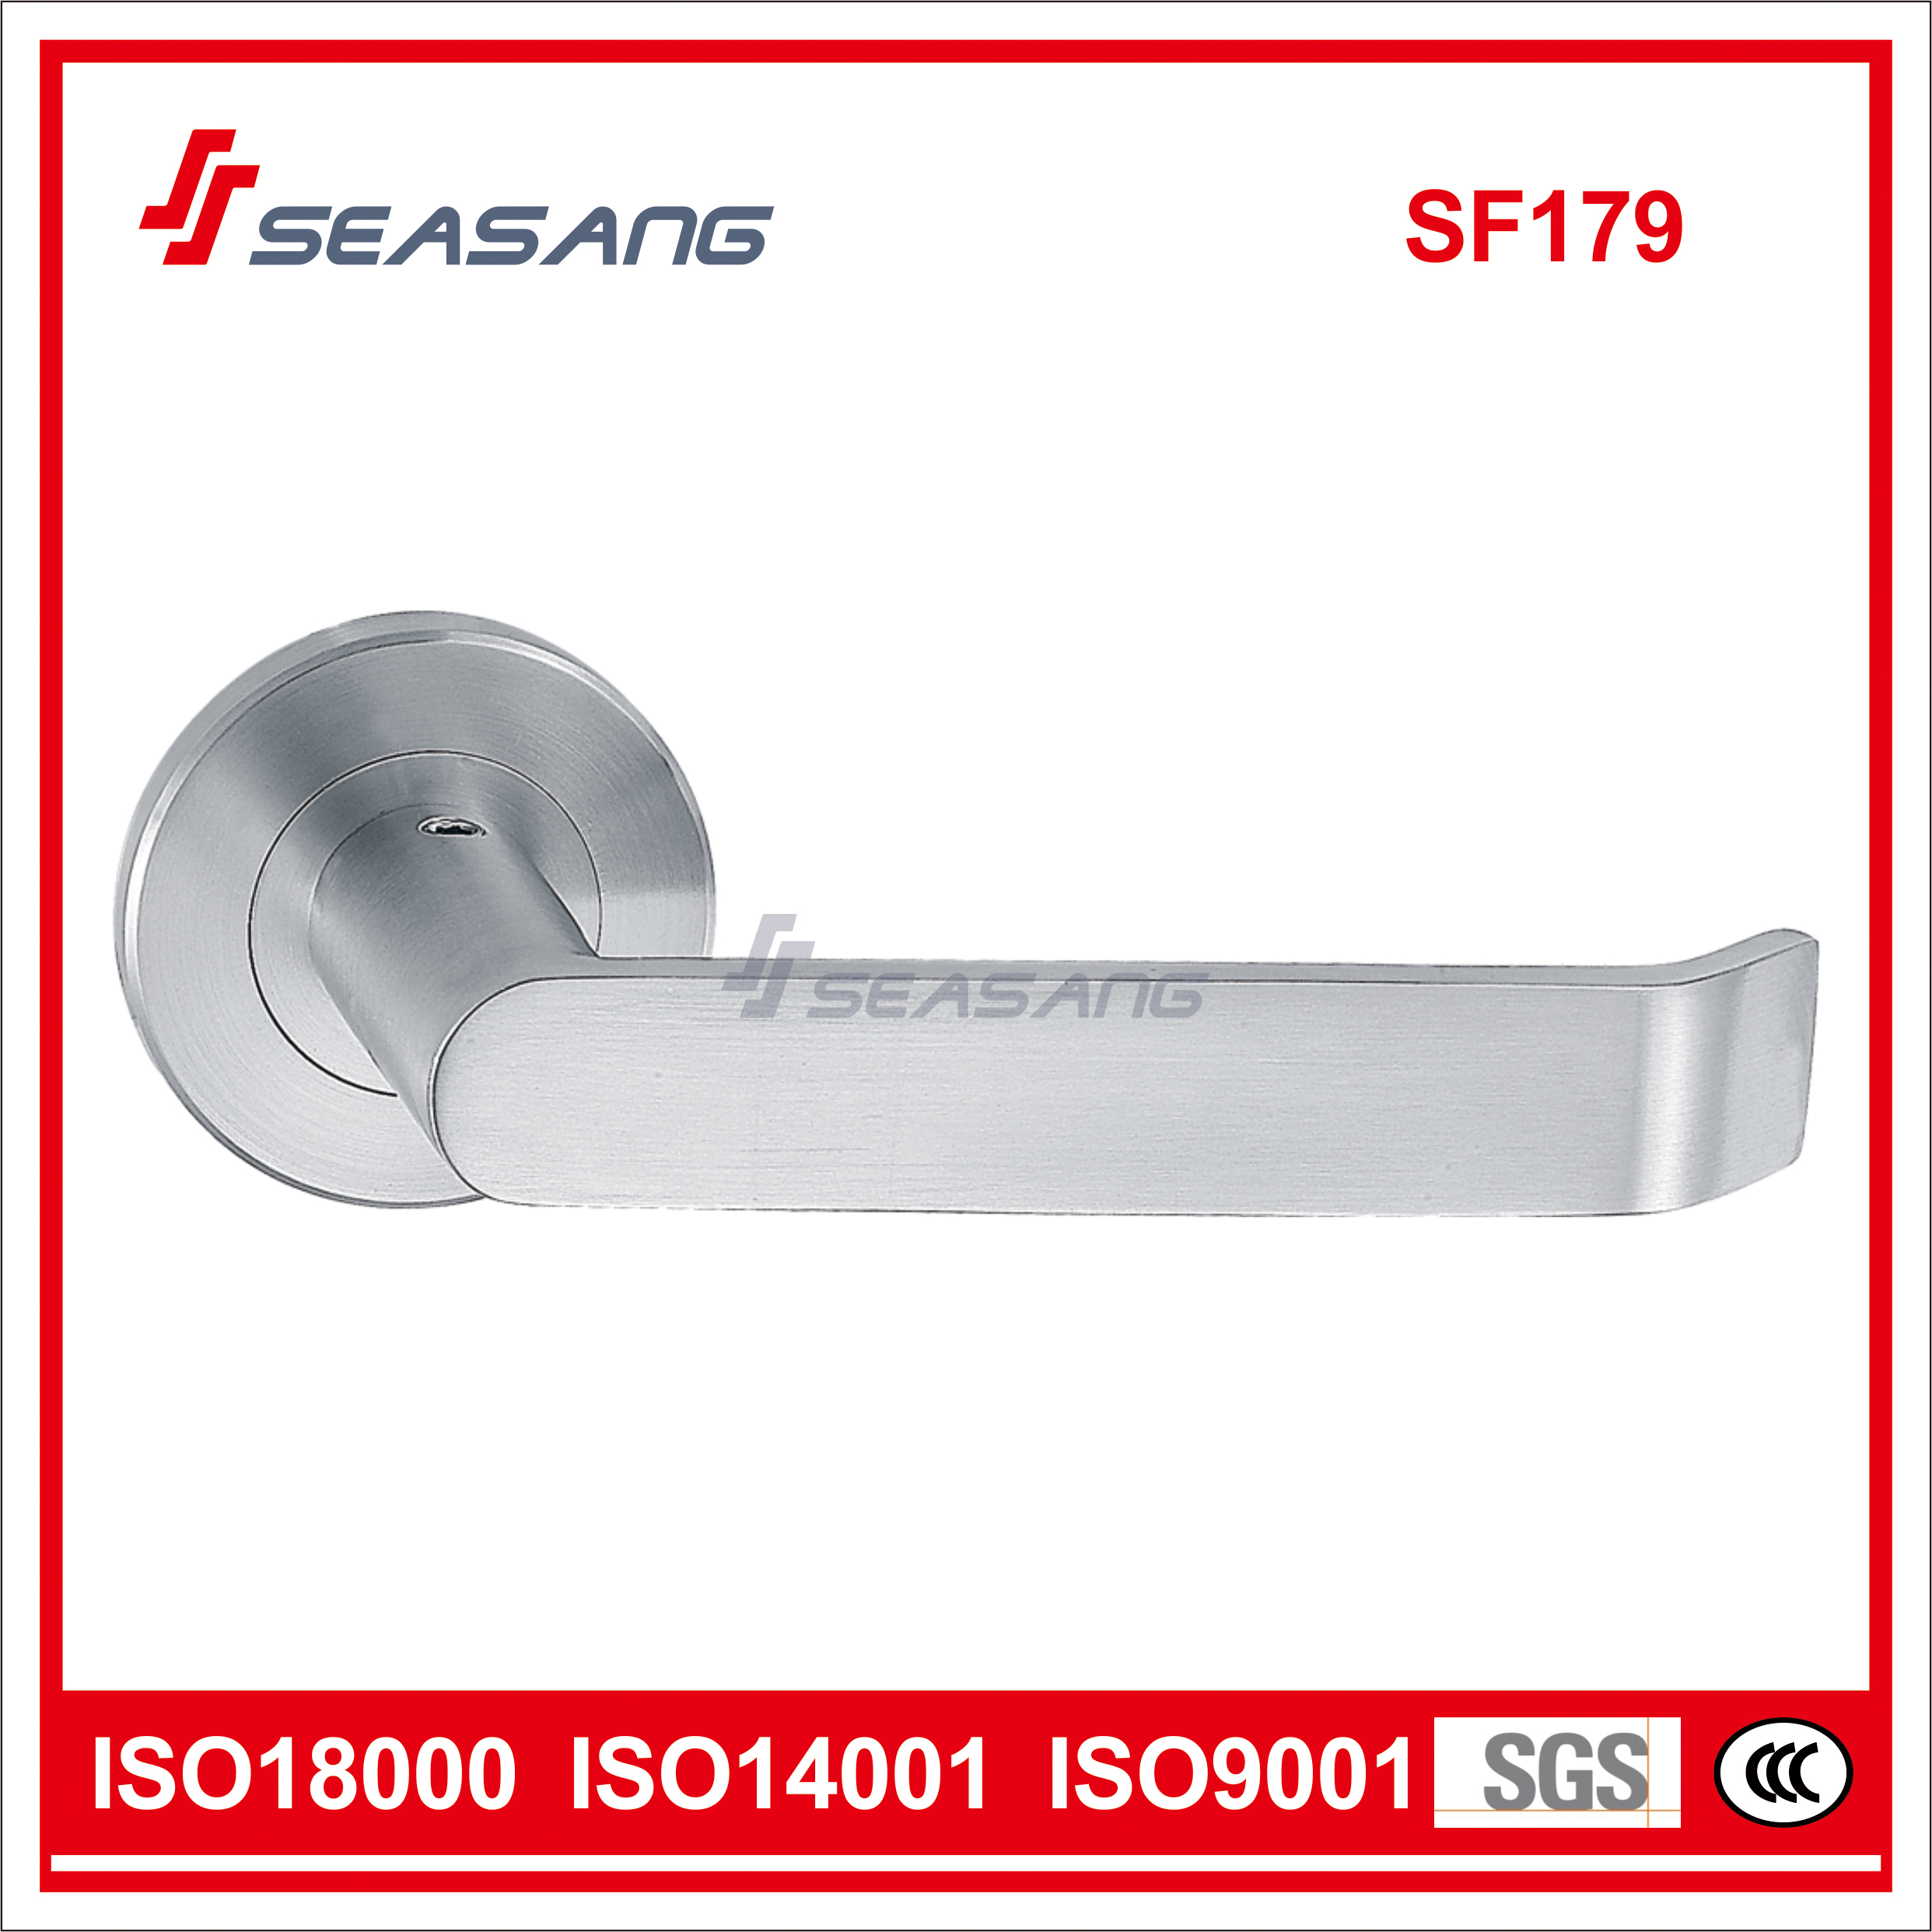 Stainless Steel Door Handles Outside And Locks Solid Cast Lever Handles